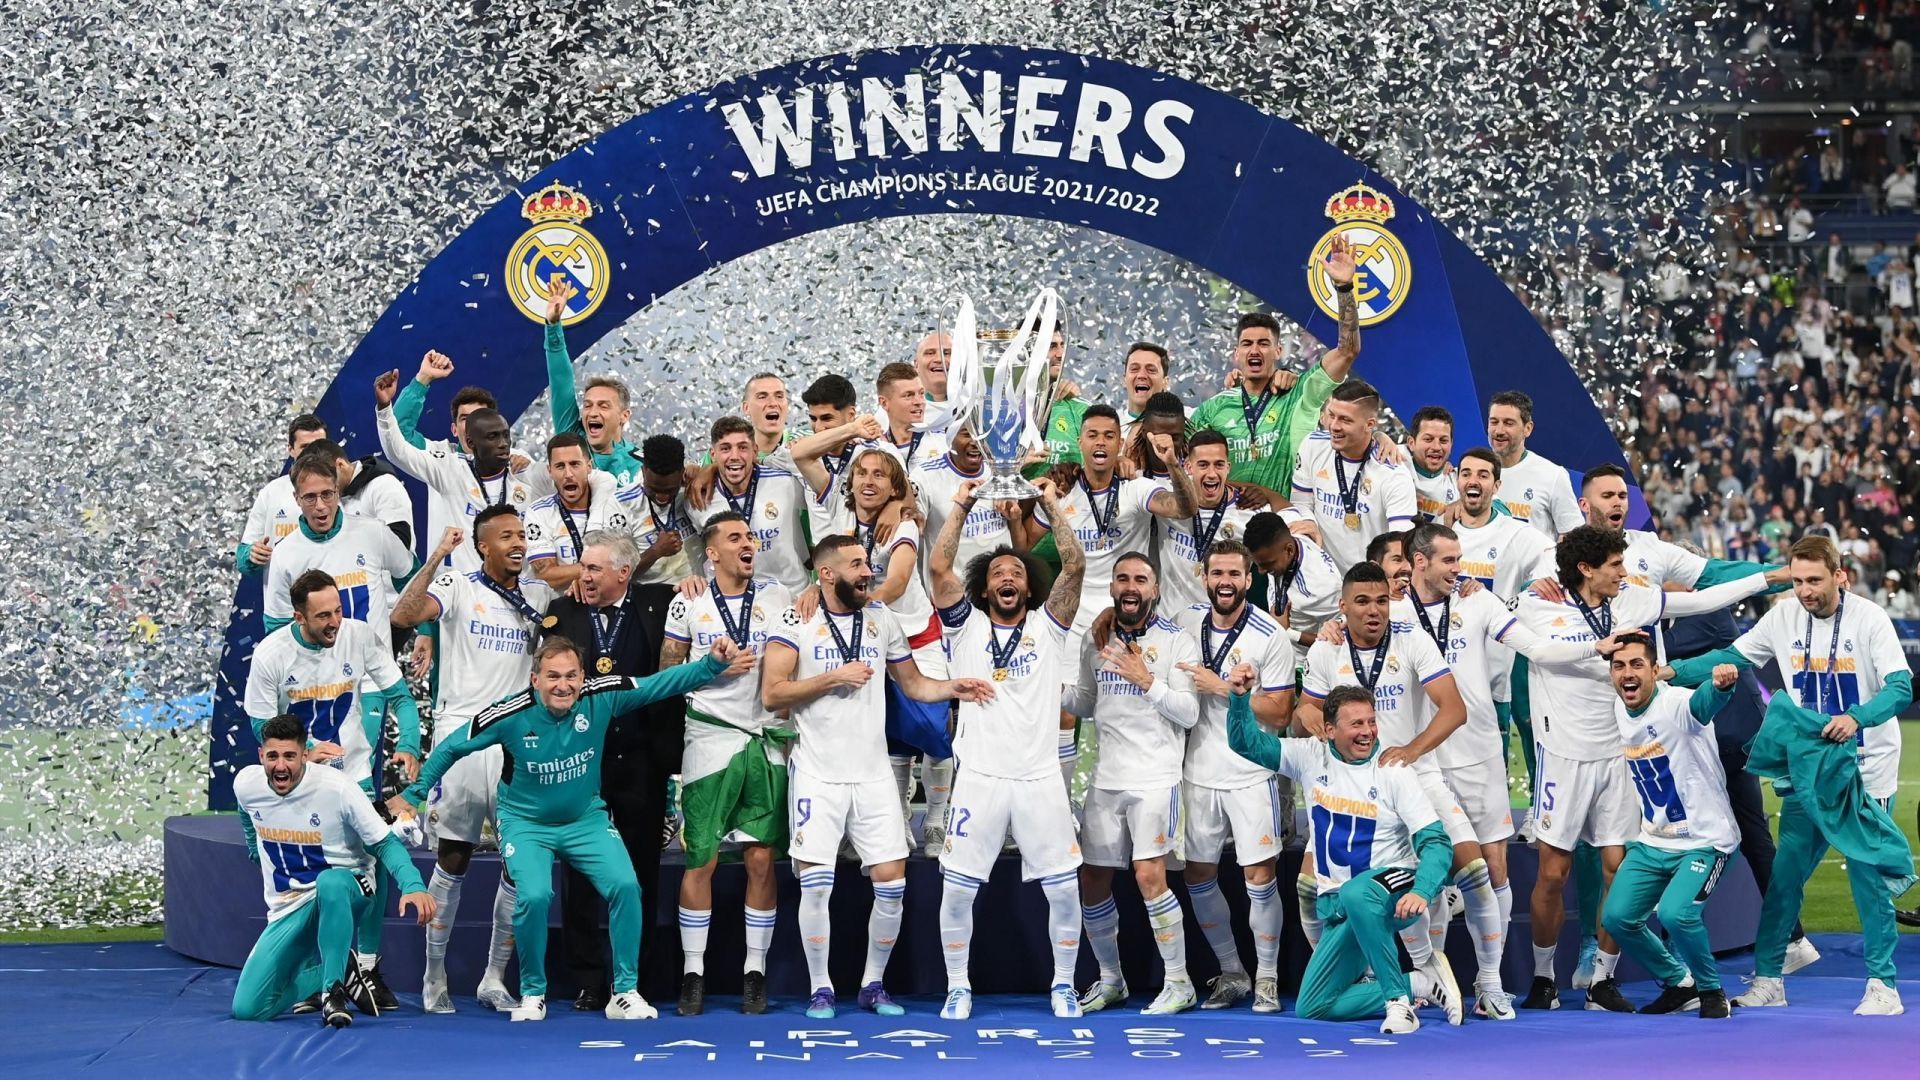 Real Madrid players celebrate after winning the 2021-22 Champions League title.